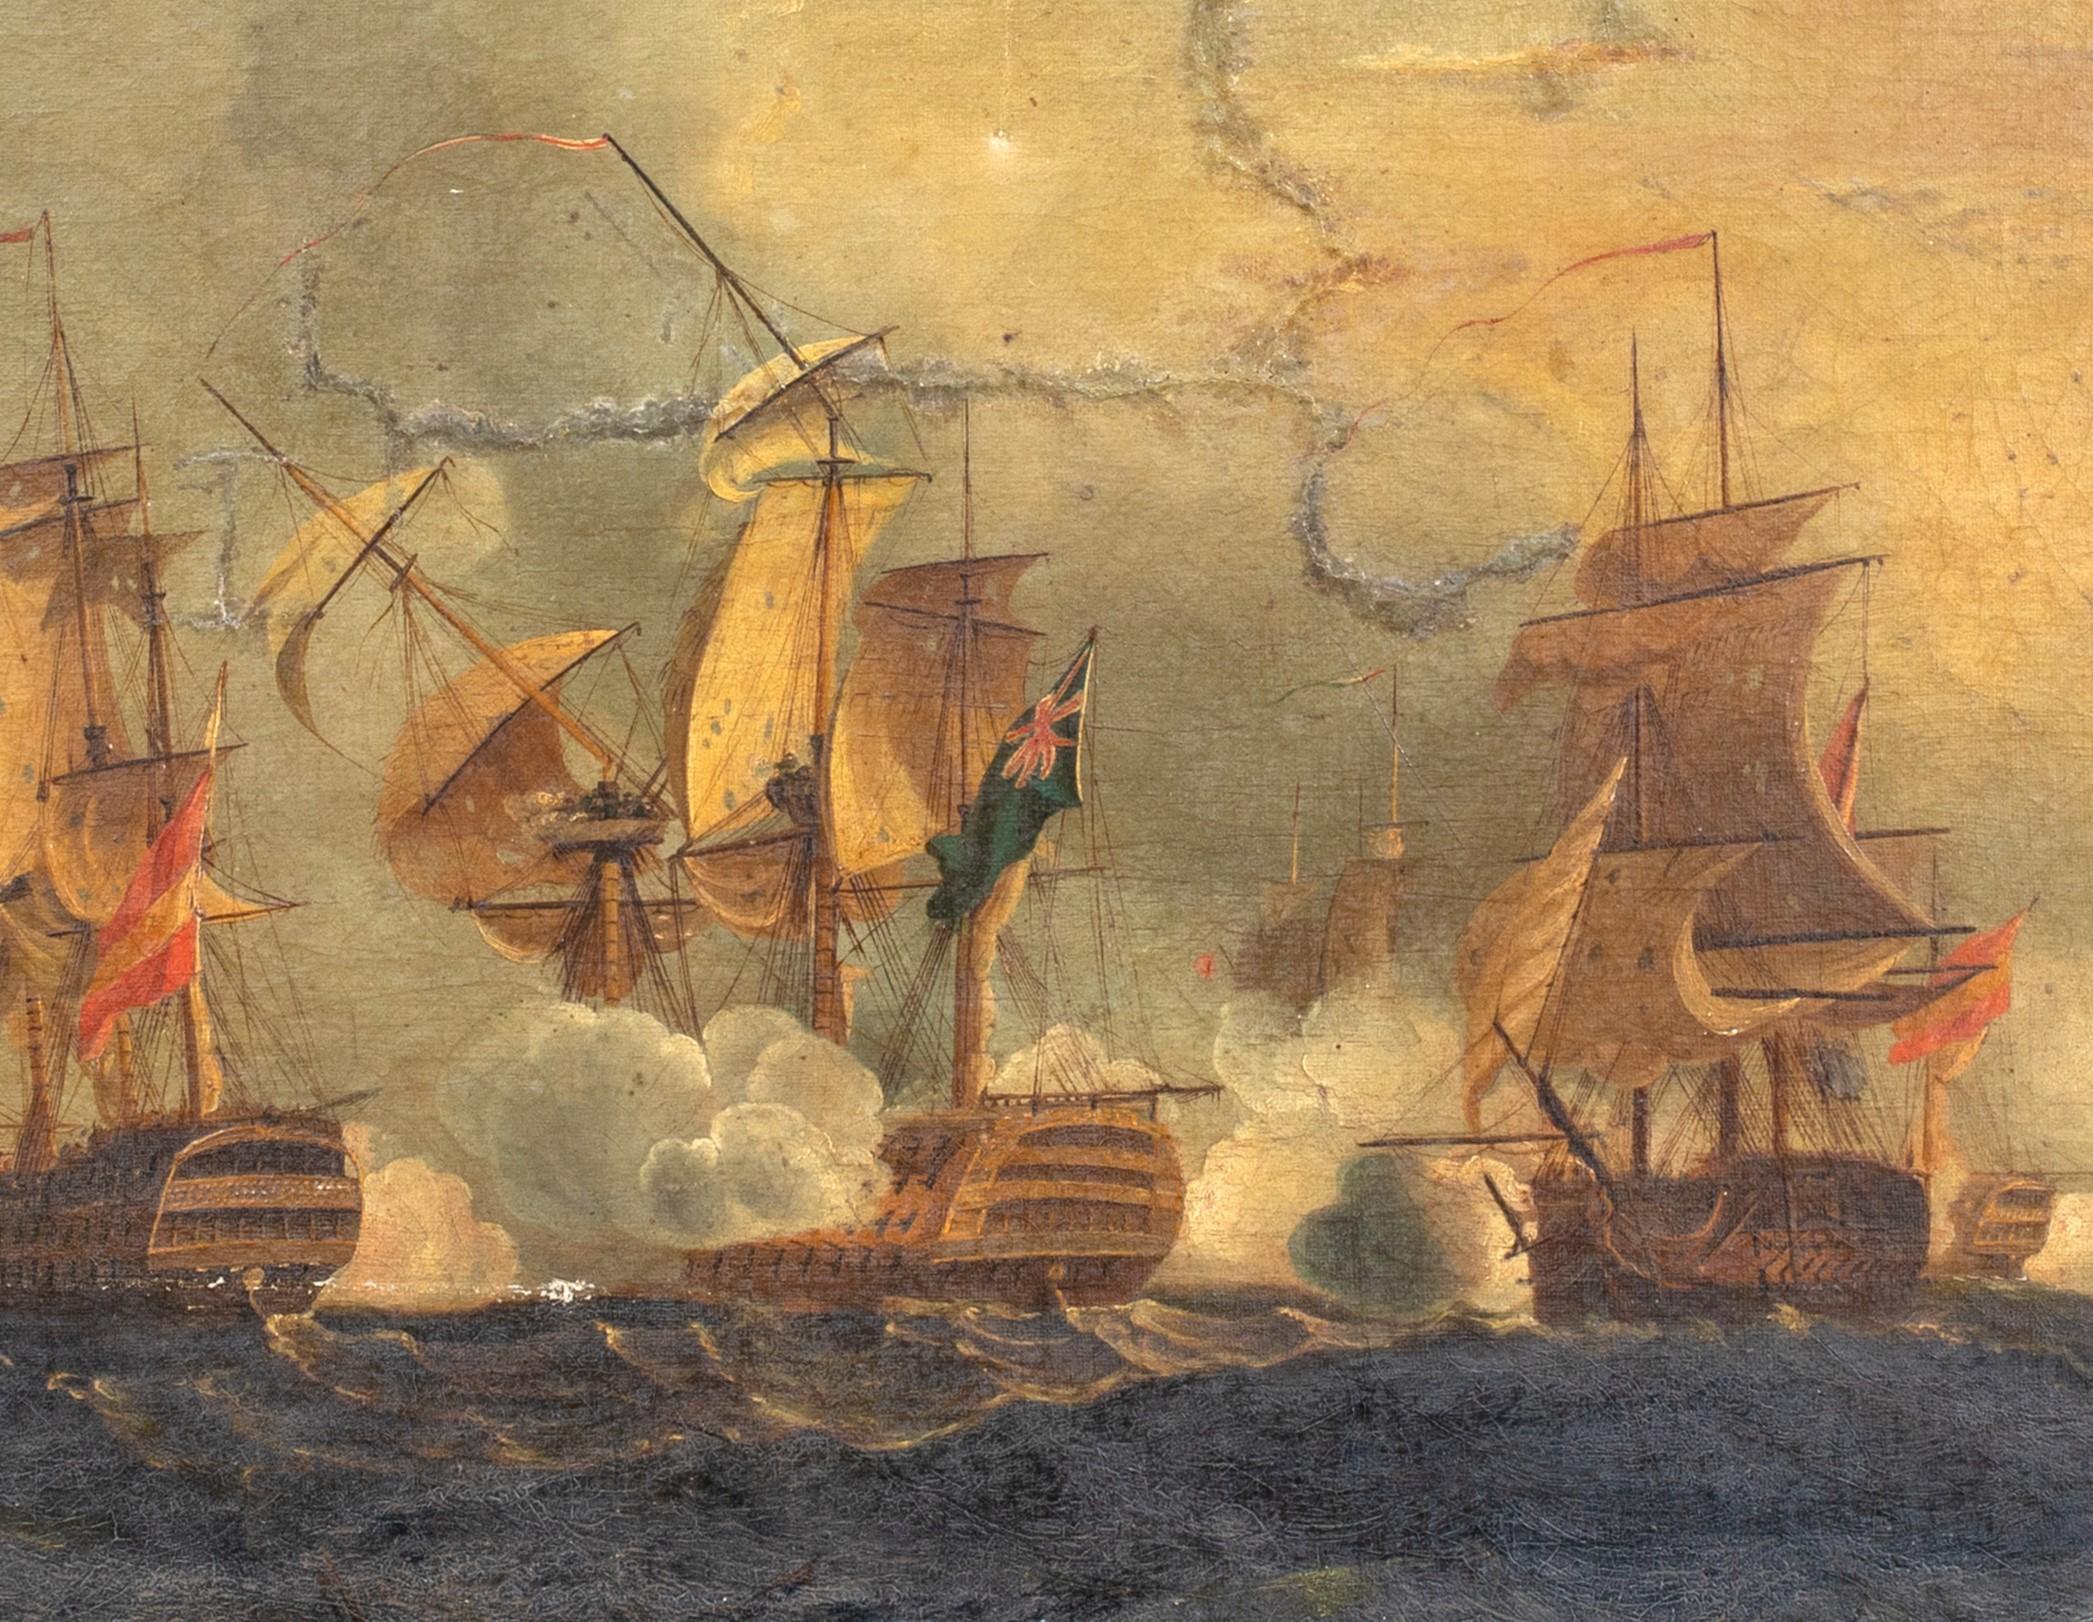 The Battle of Cape St Vincent, Anglo-Spanish War, 1797 

attributed to Thomas Luny (1759-1837)

Large 18th Century British Naval scene of the Battle Of Cape St Vincent, 1797, oil on canvas attributed to Thomas Luny. Excellent and important original